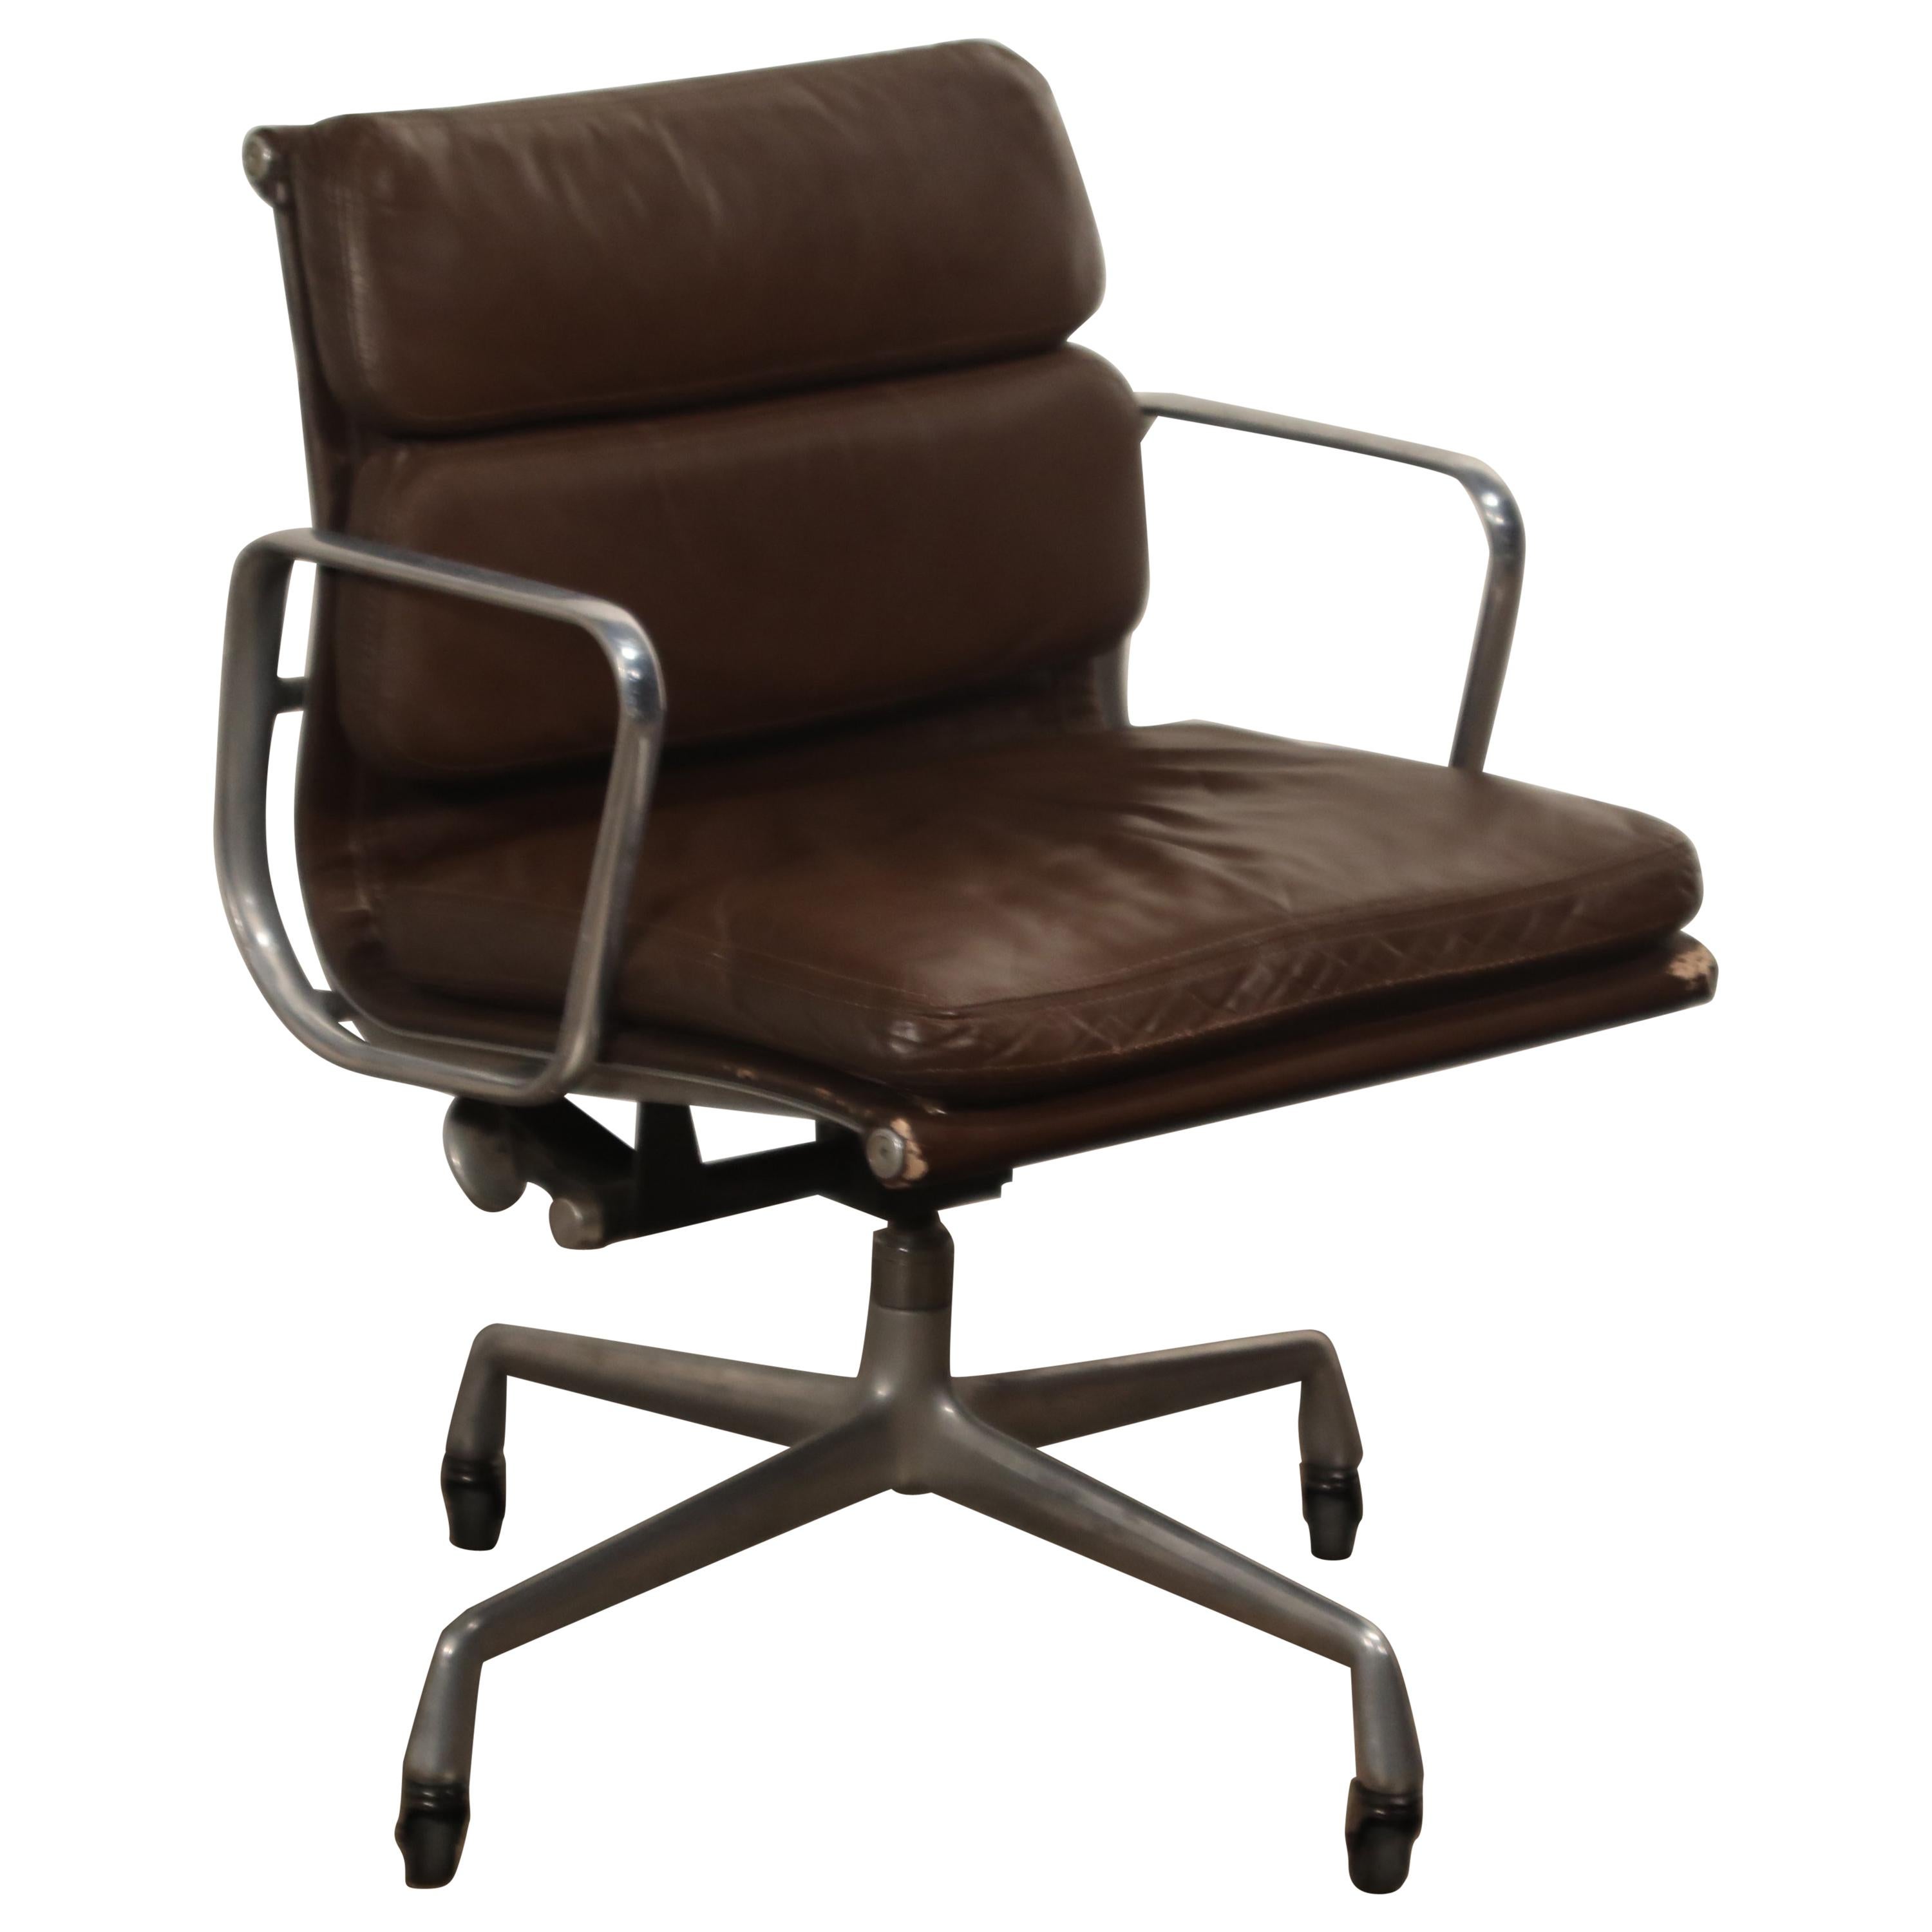 Charles Eames for Herman Miller Dark Brown Soft Pad Management Chair, circa 1970